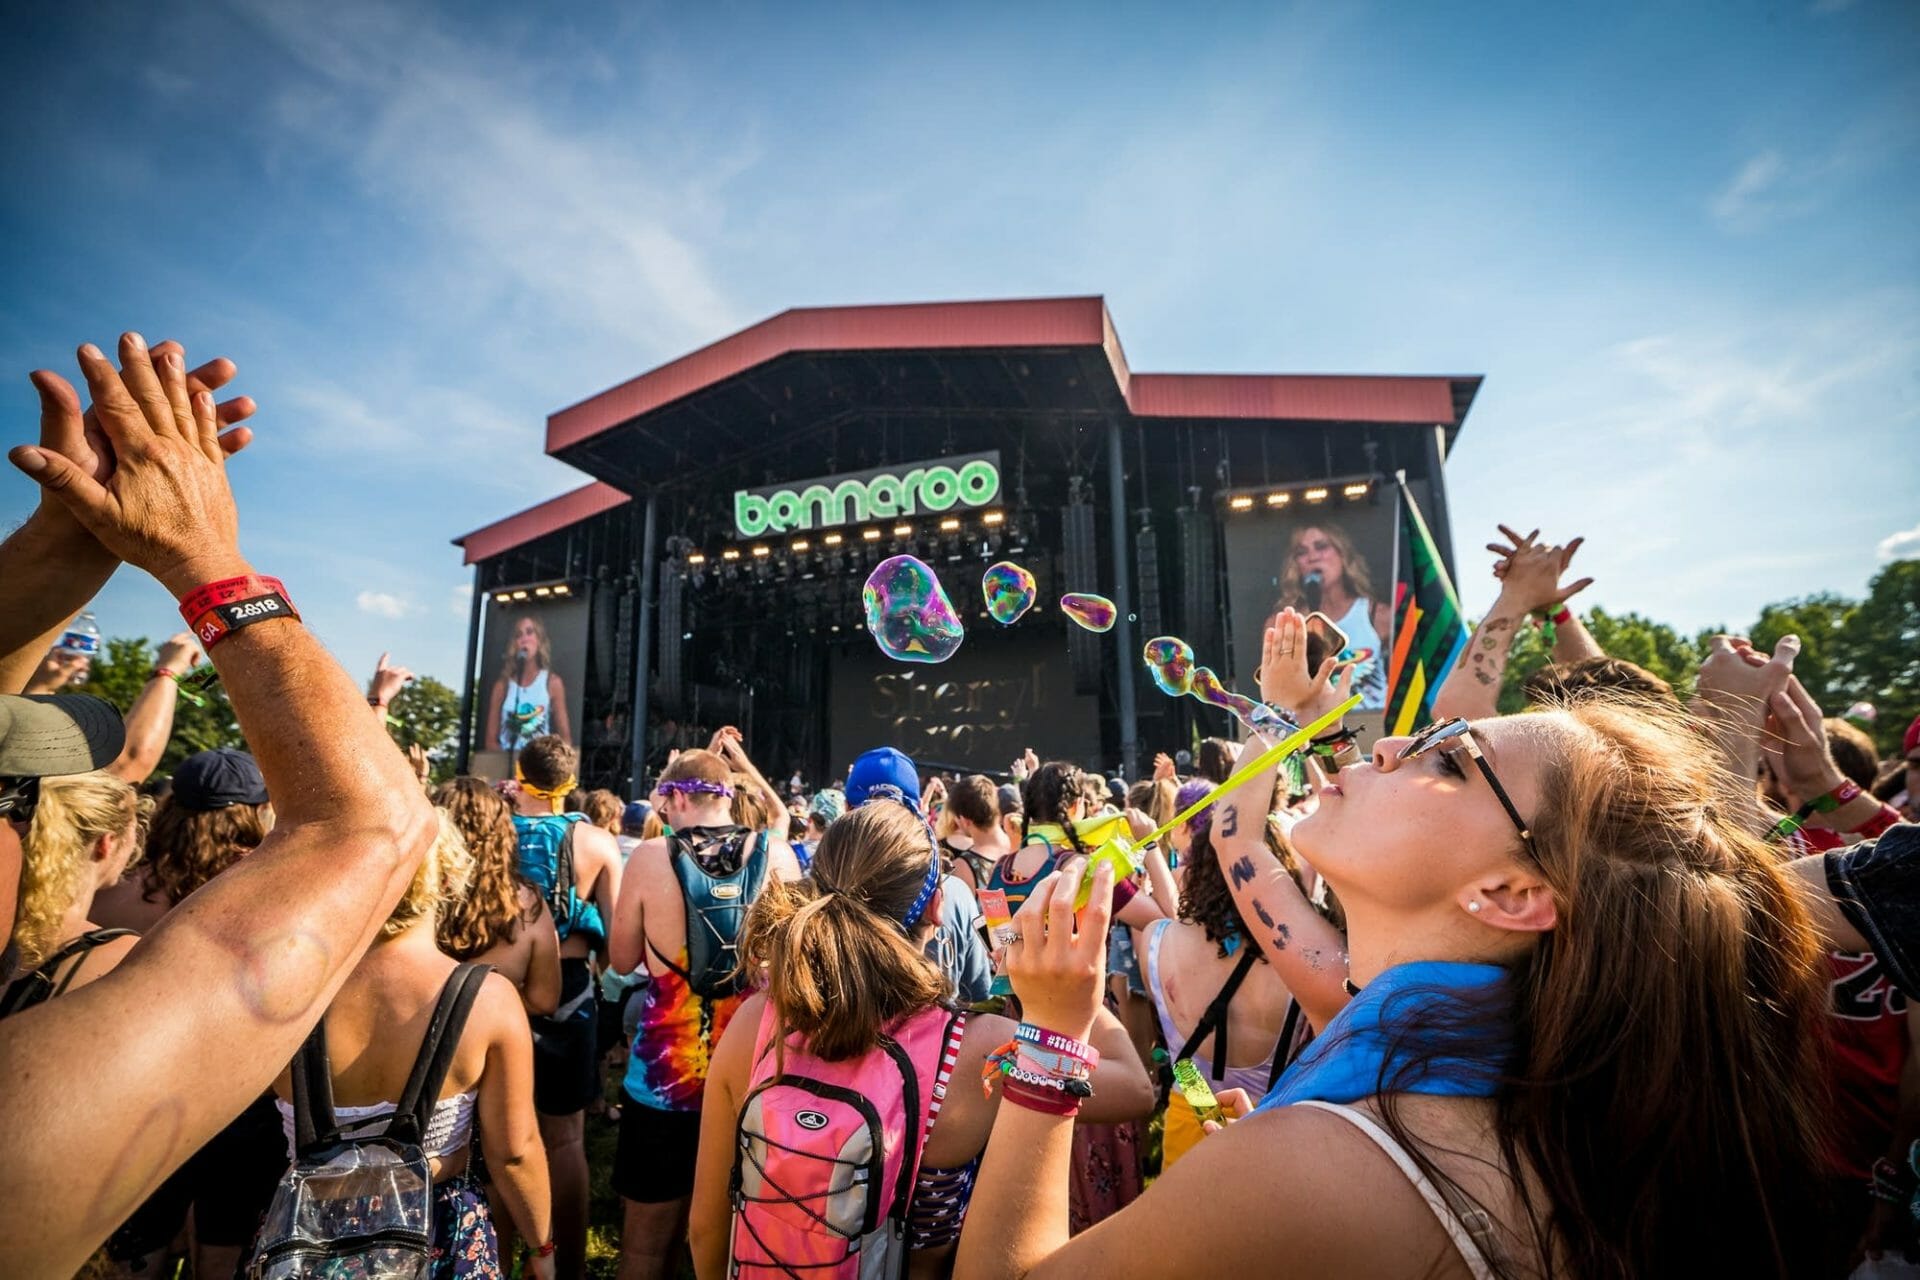 Live Nation has booked twice as many shows for 2022 as it did in 2019Bonnaroo E1617227952357